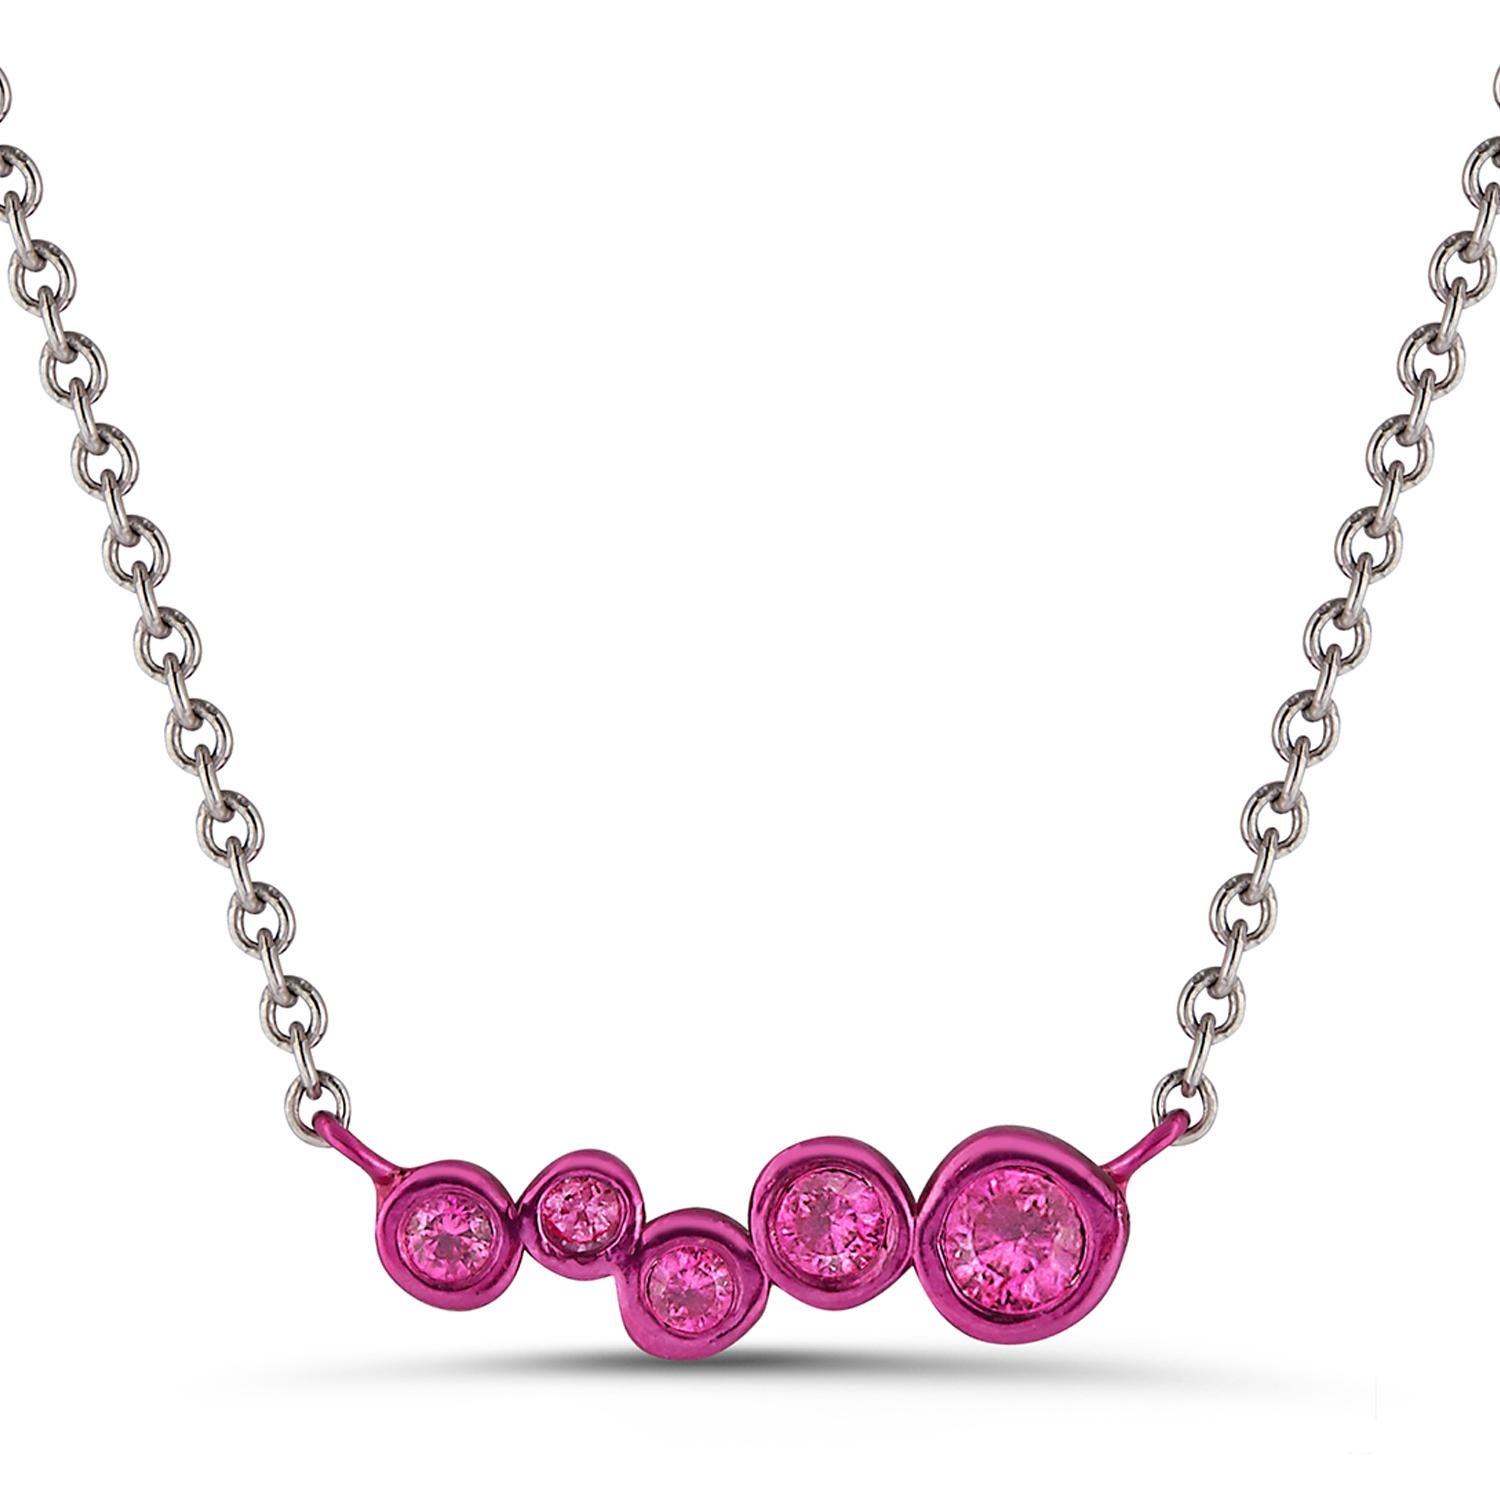 Hi June Parker's version of the classic bar pendant sprinkled with tapering sizes of Rubies ceramic plated with Fuschia pink to add a pop of electric color to your neck.

Inspired by seeing the cross-section view of life, as if slicing a tree to see